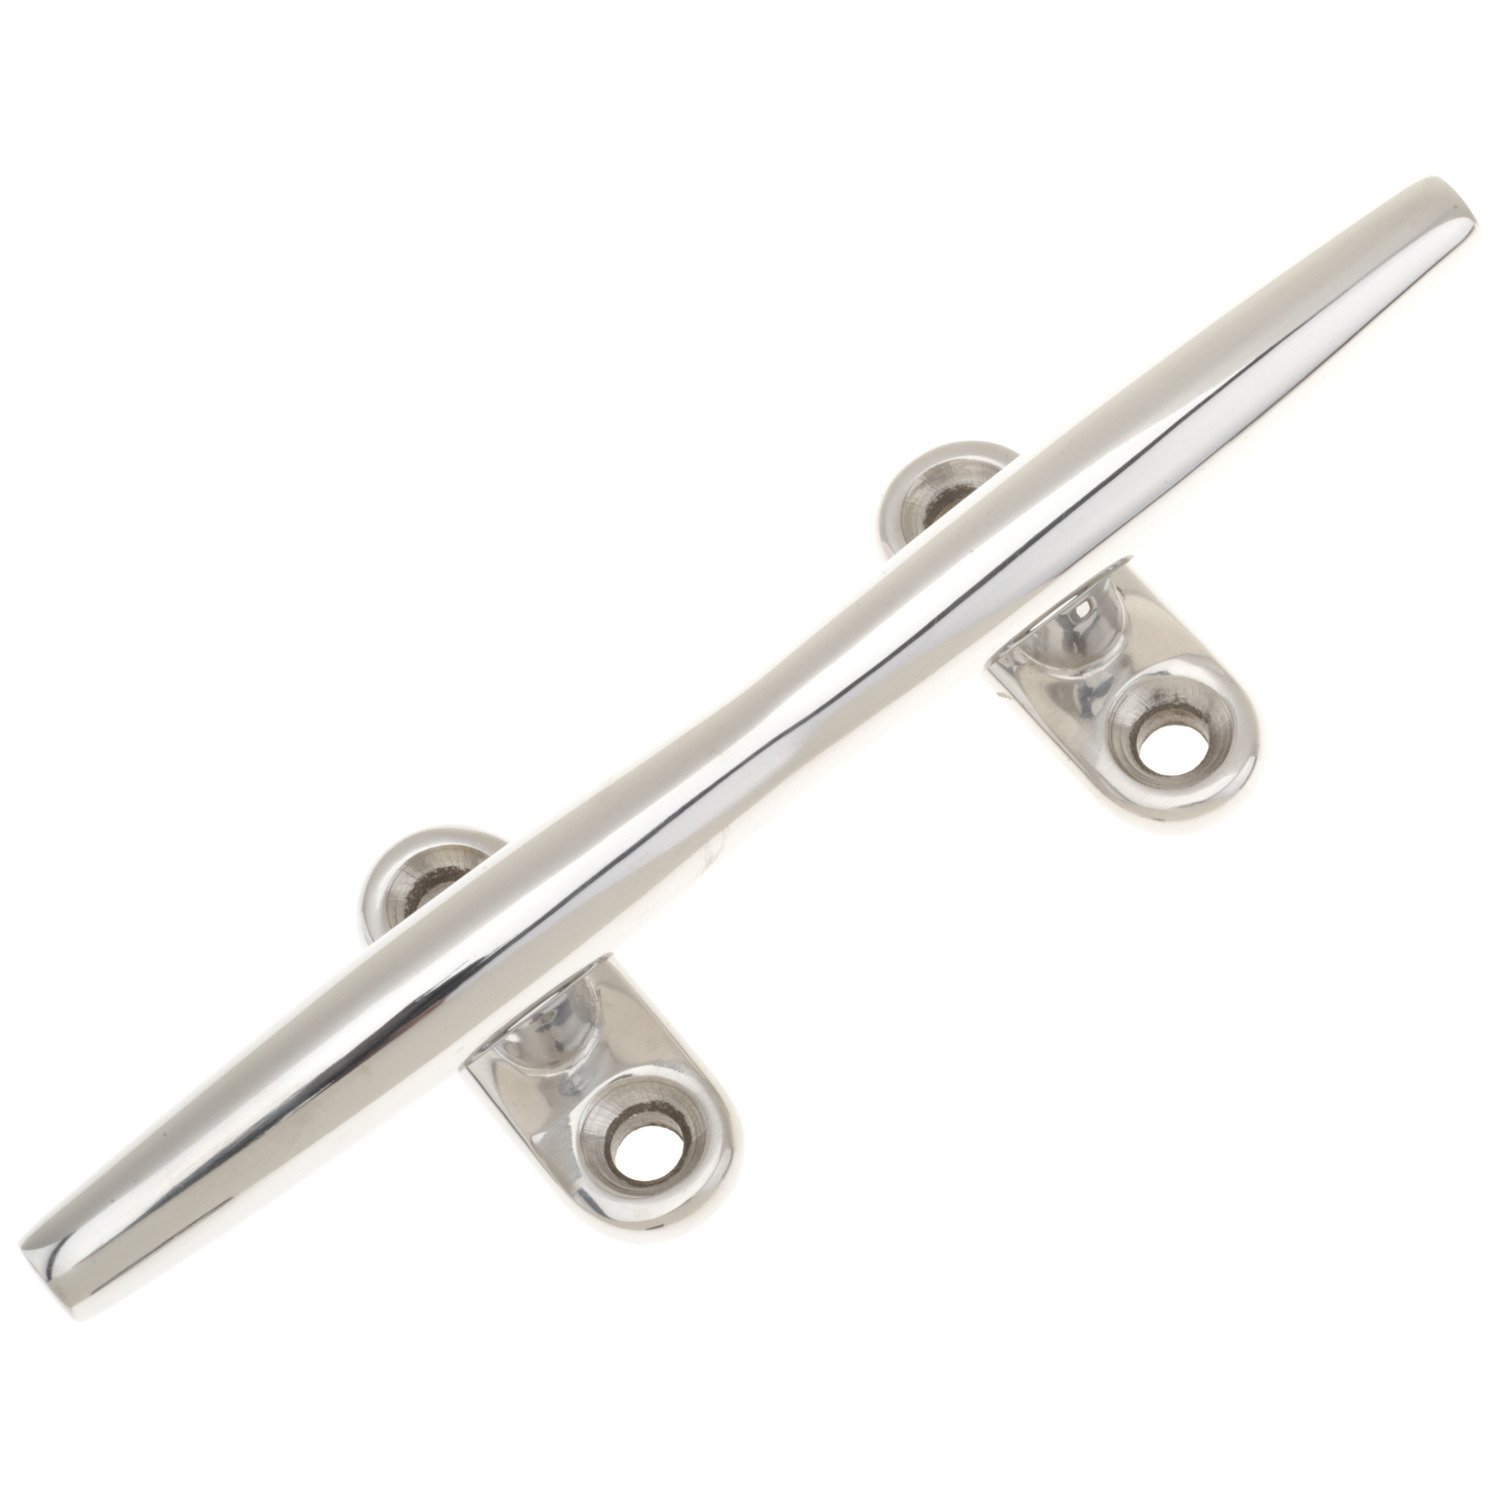  Perma-Cast PH53 Chrome Plated 3/4 Inch Rope Hook - Cleat Type  : Boating Cleats And Chocks : Sports & Outdoors